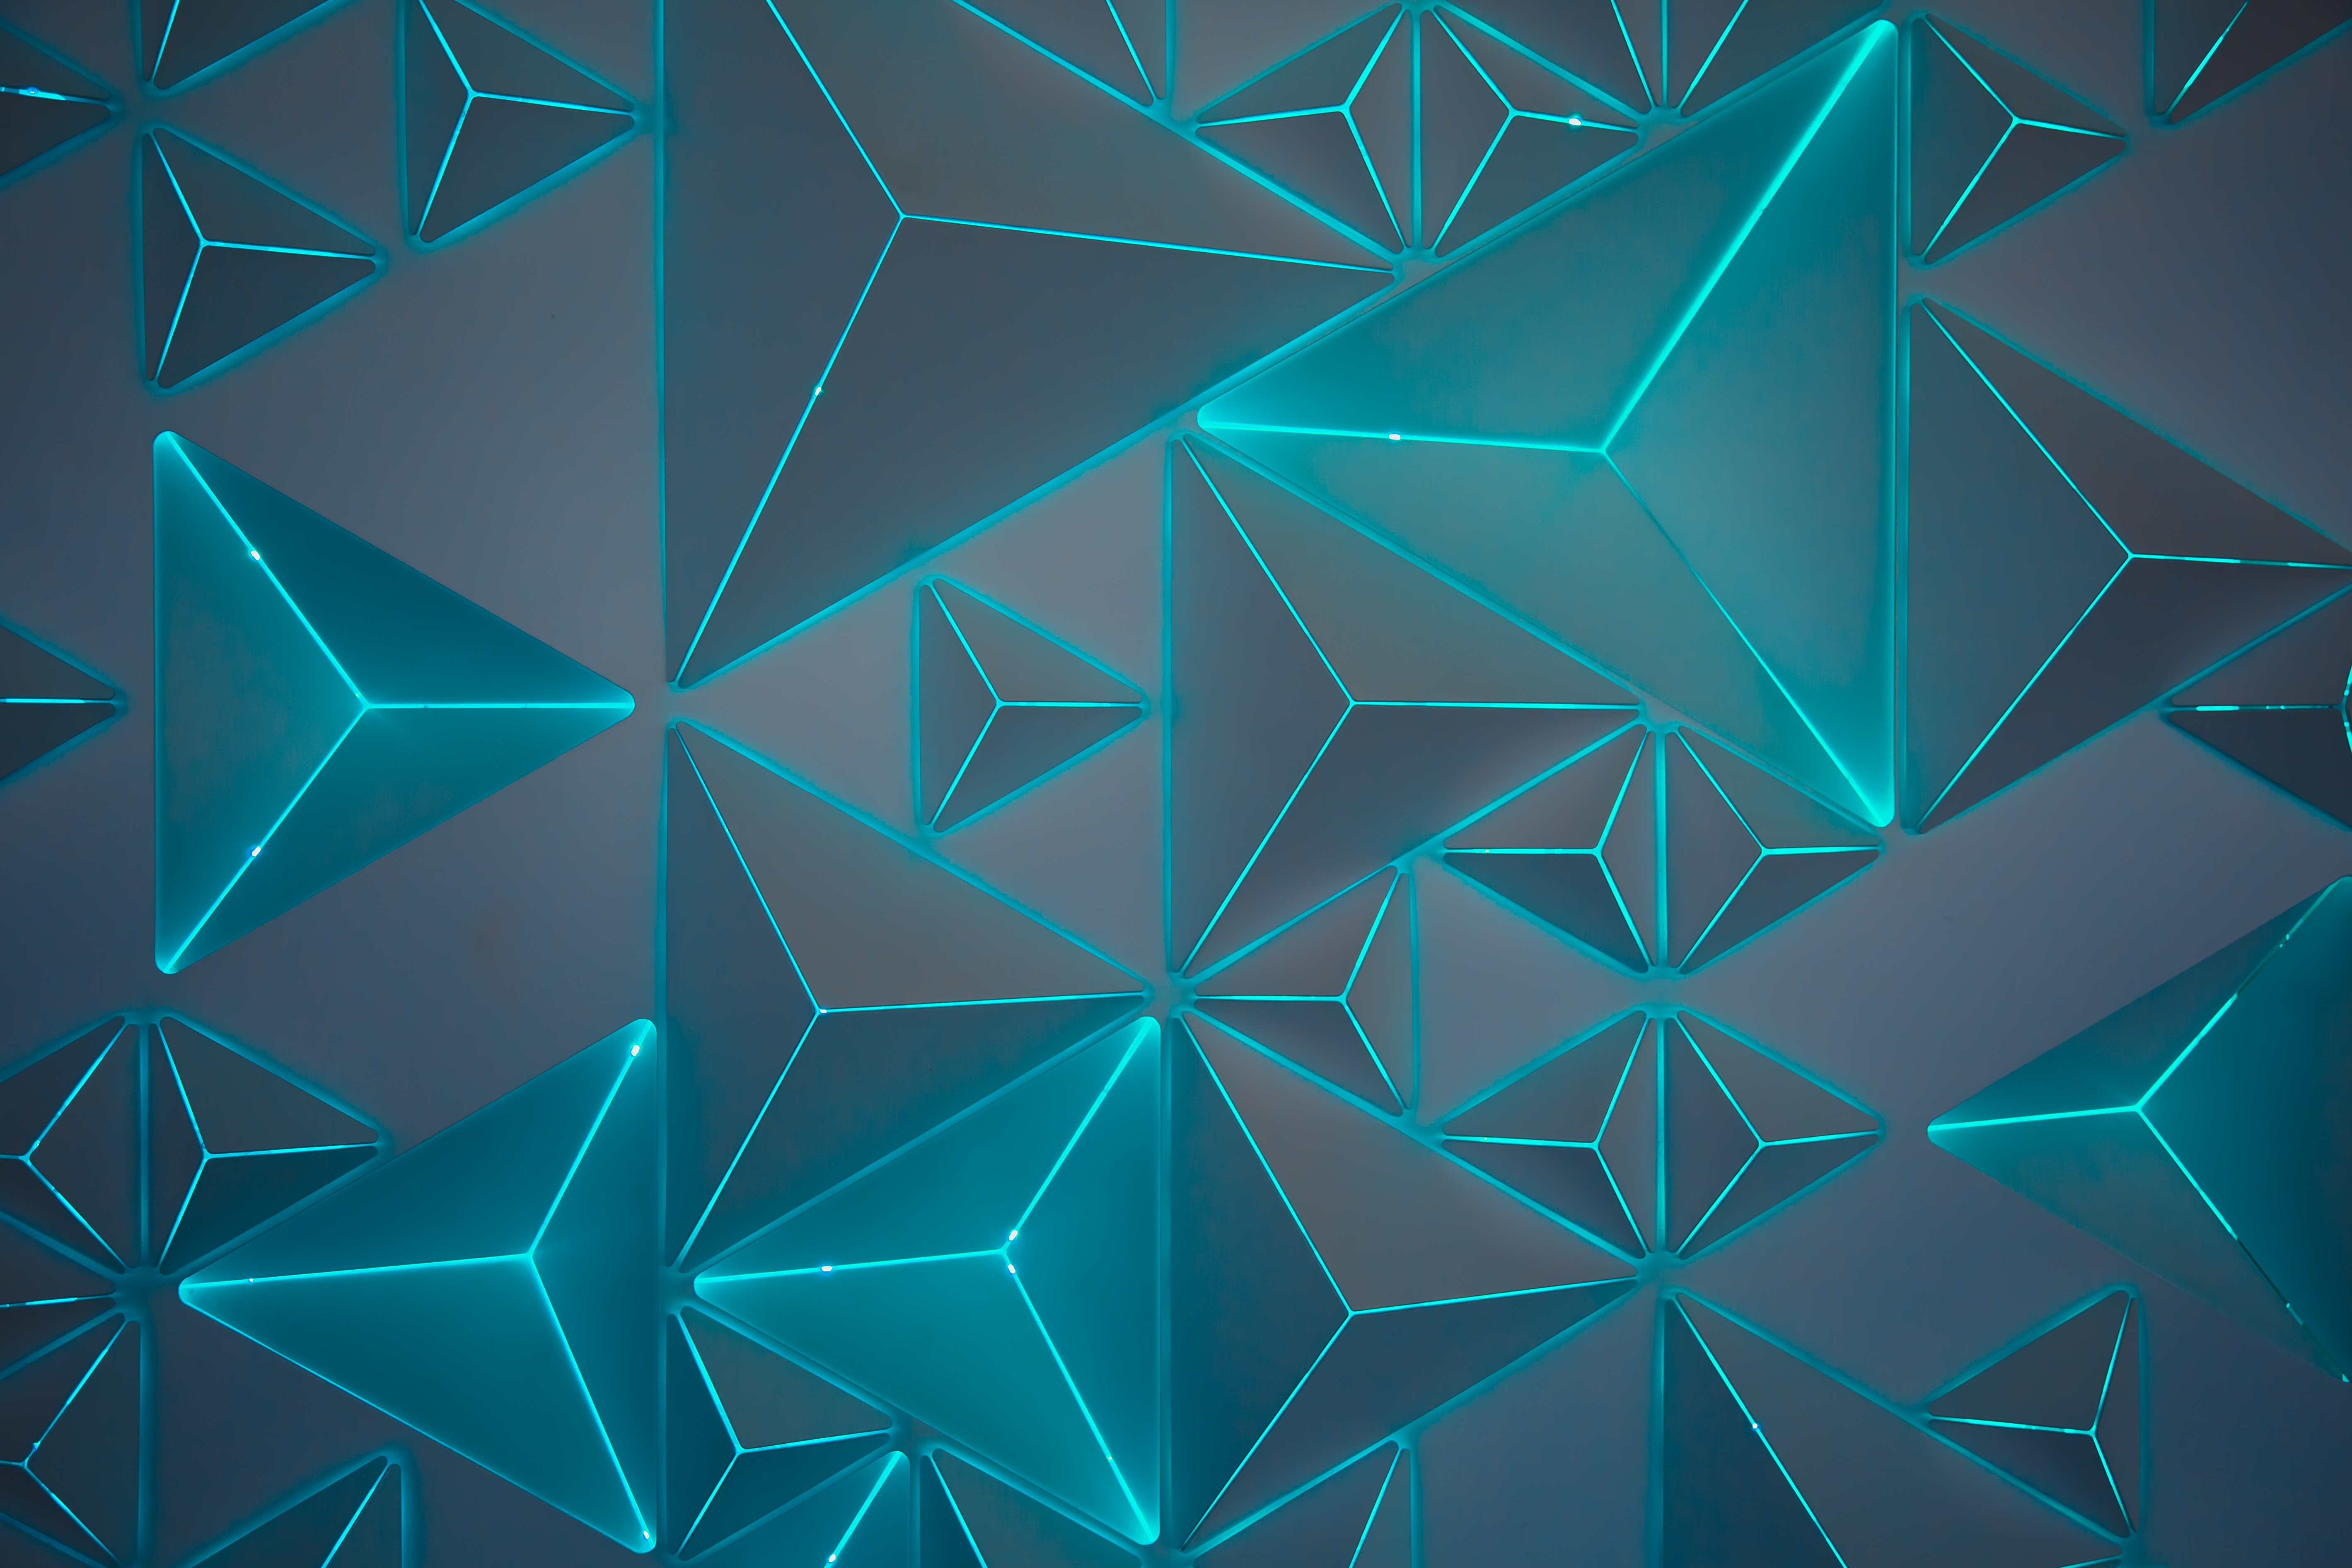 5677x3785 #triangle, #geomerty, #abstract, #colour